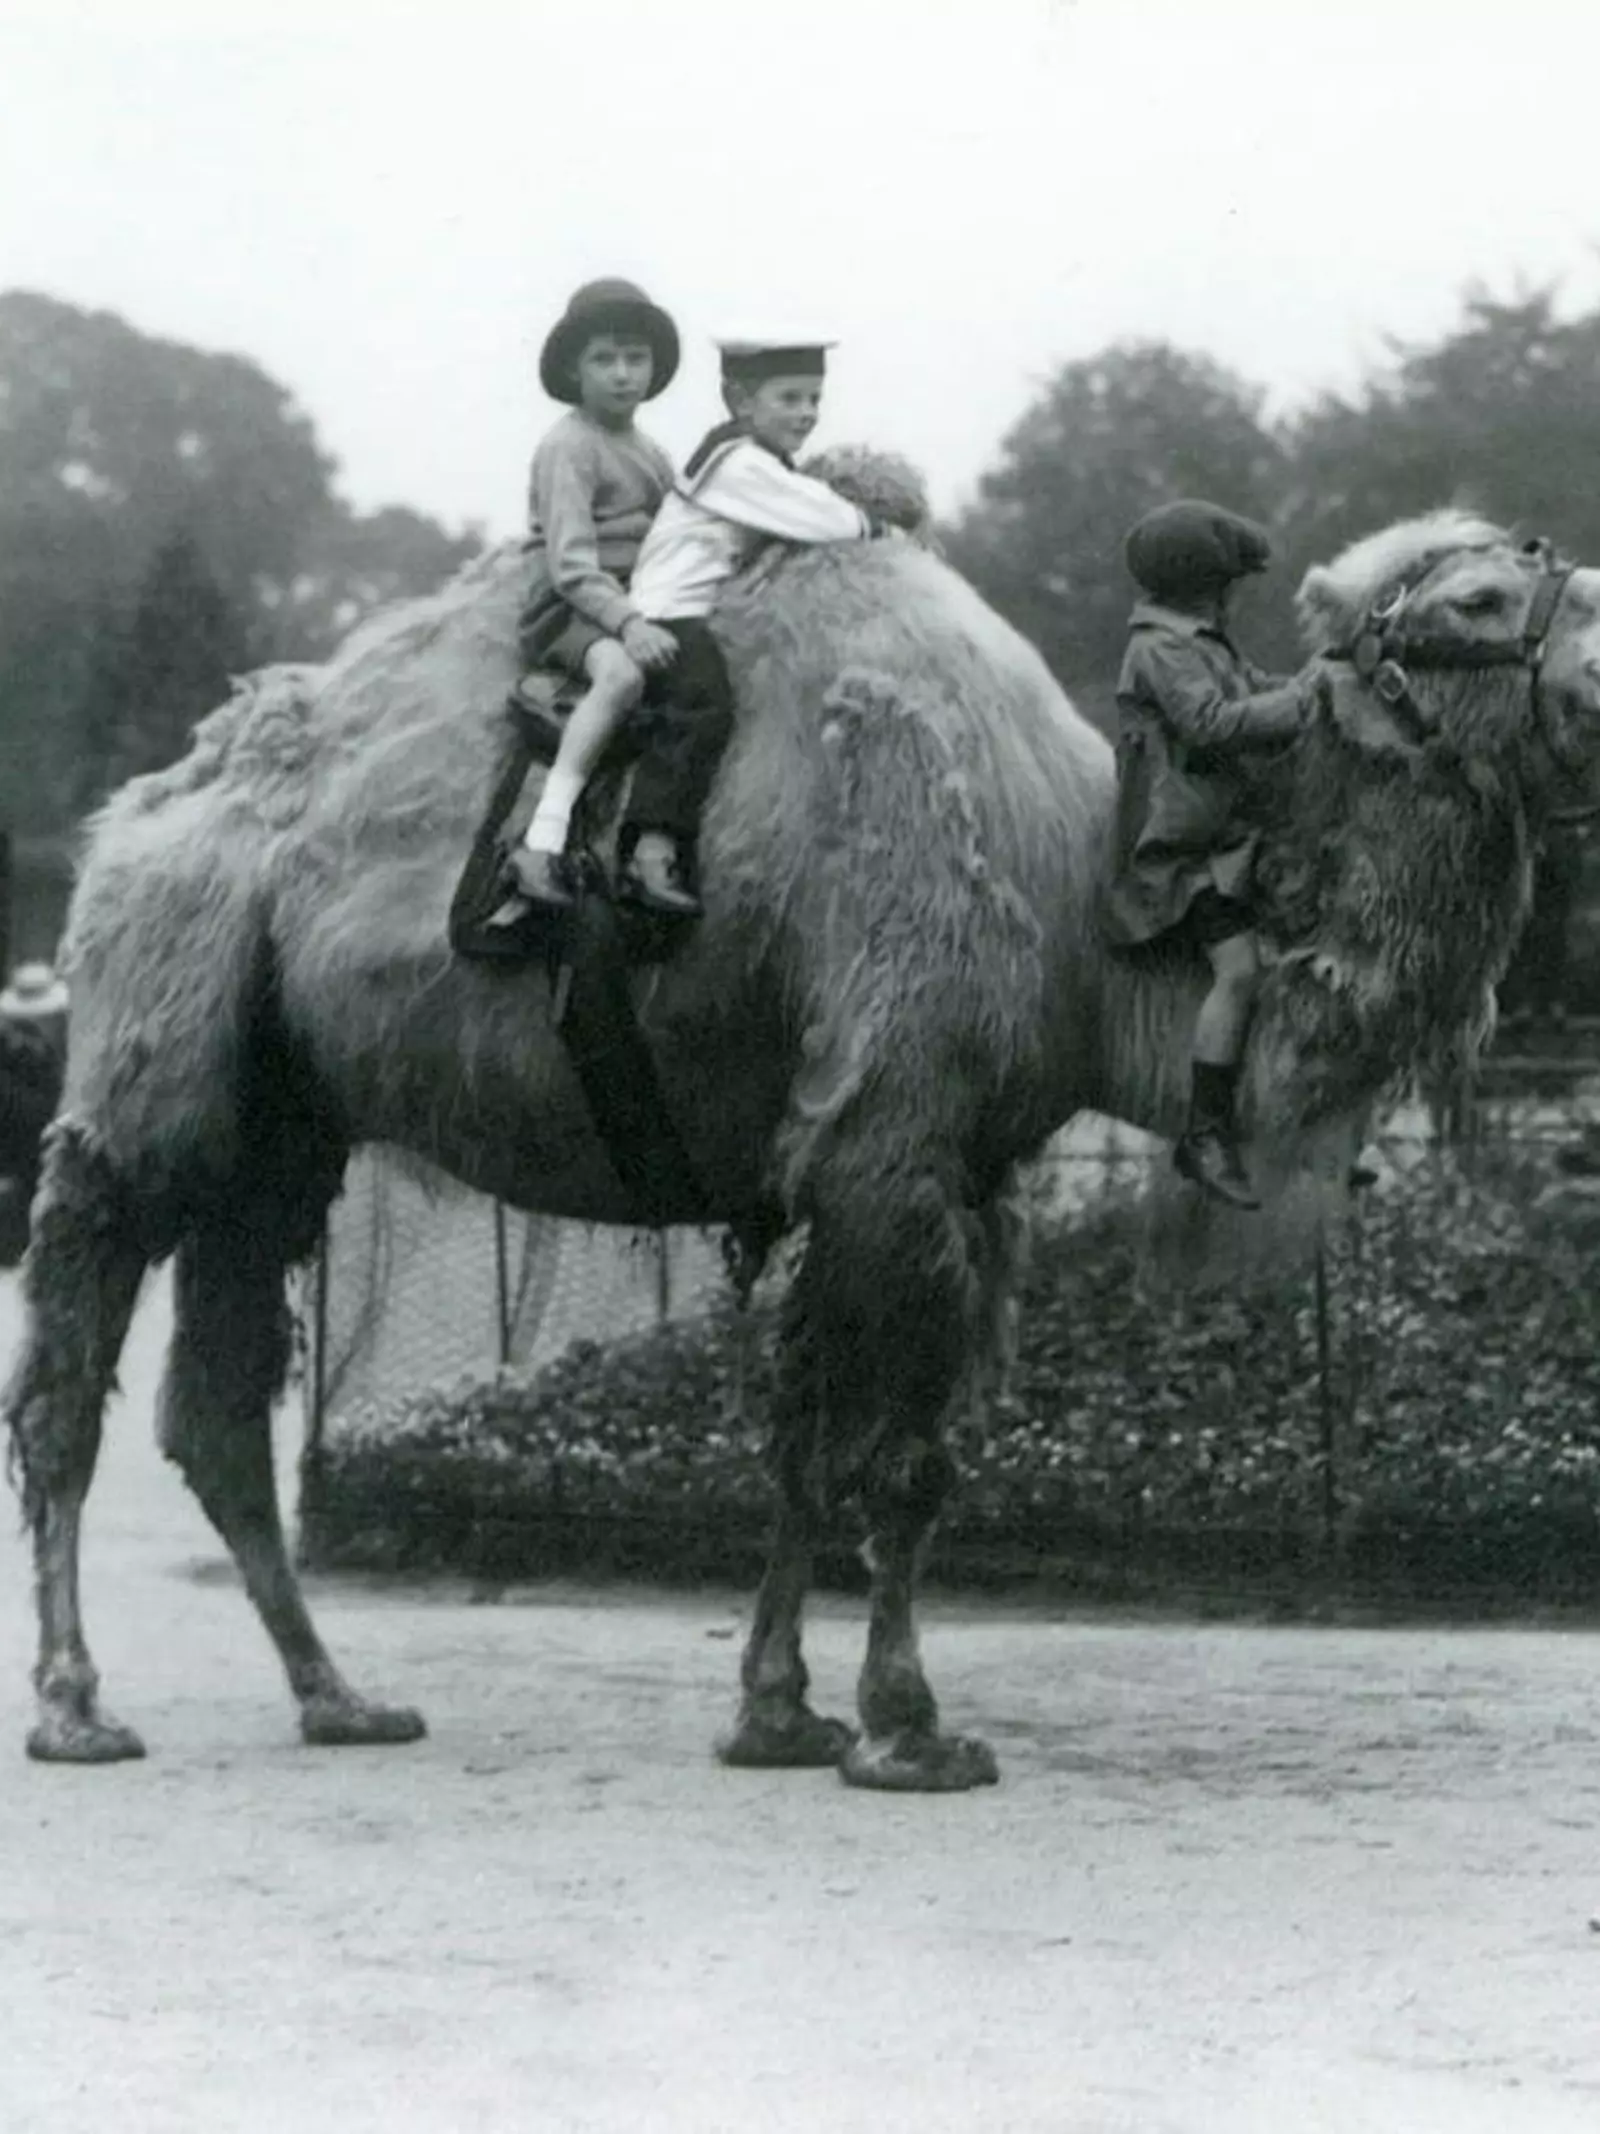 A Bactrian Camel ride with keeper Harry Warwick at London Zoo, June 1924. Two small boys, one in a sailor suit, ride between the humps and another on the neck.